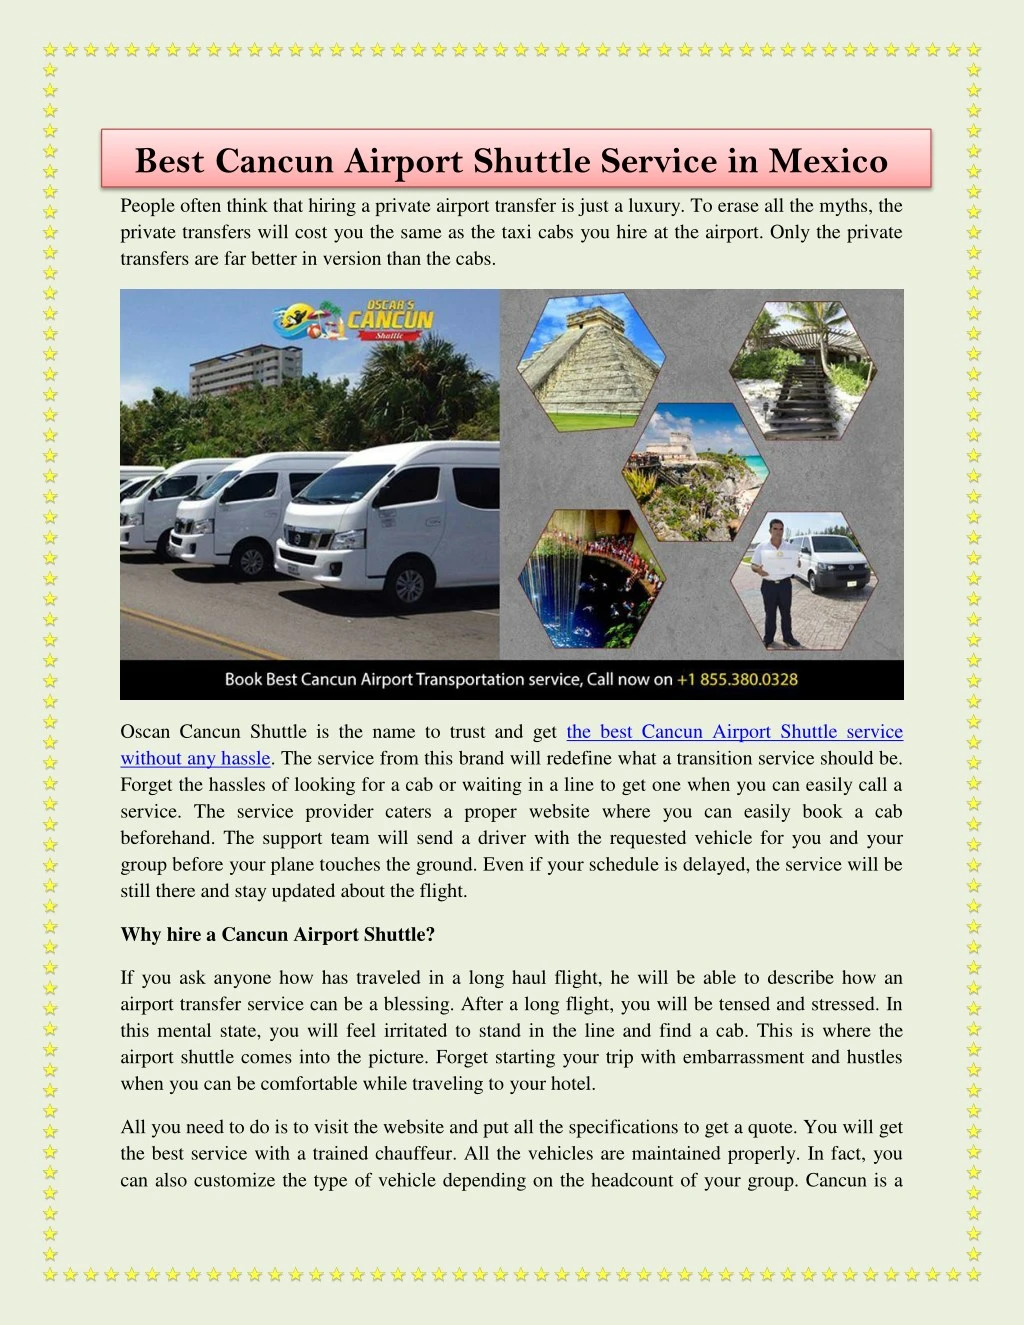 best cancun airport shuttle service in mexico